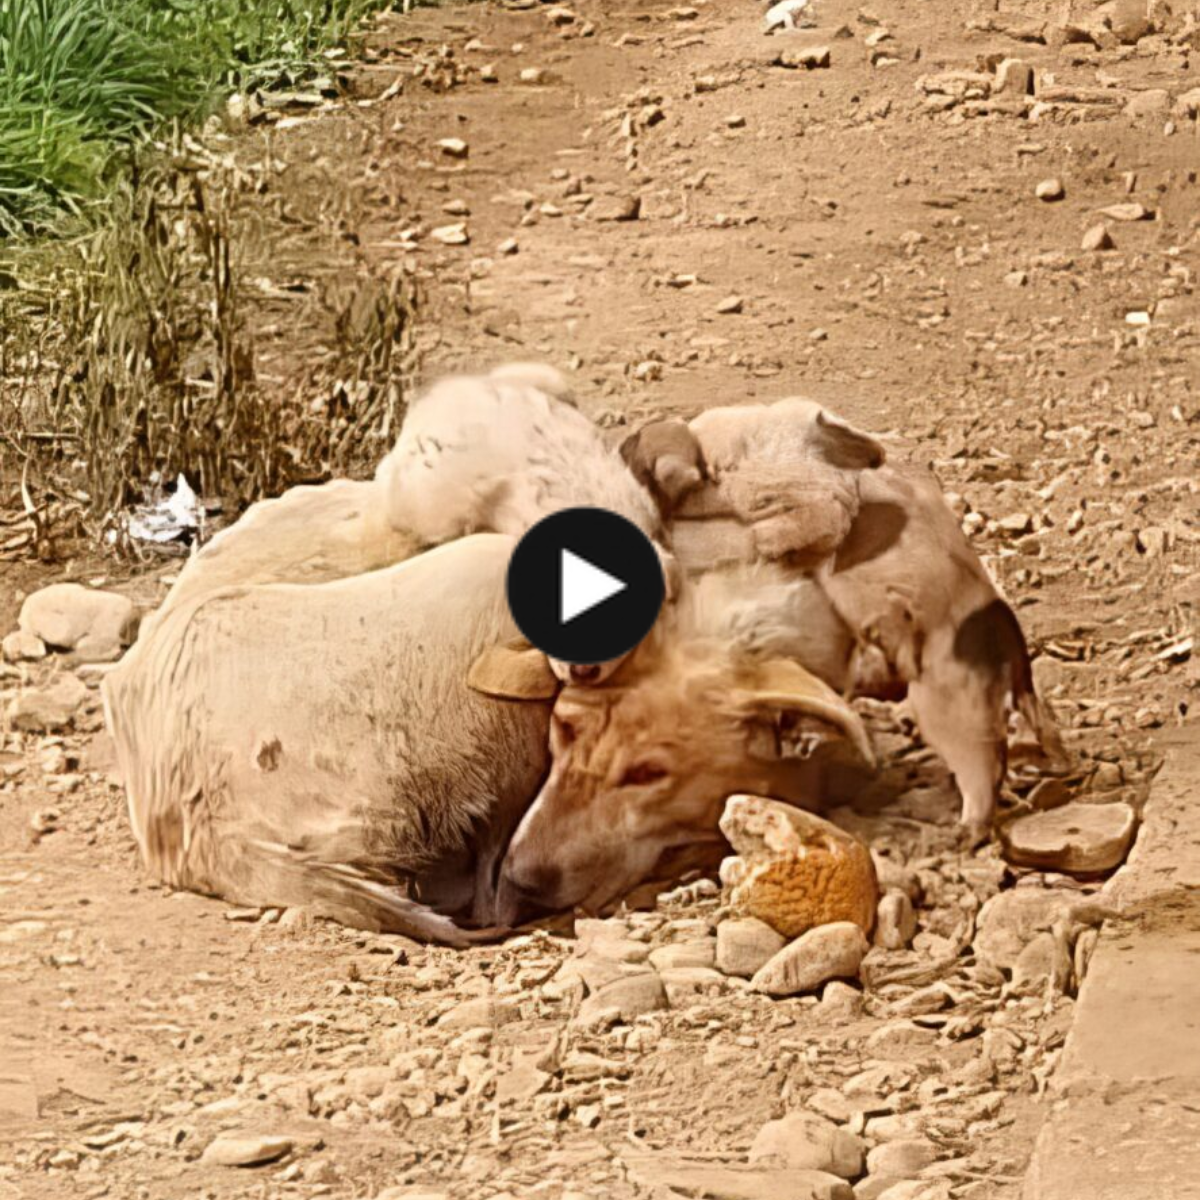 Even though she was about to die and physically weak, the mother dog still gave her baby some milk. Luckily, she met someone who was kind and willing to help.